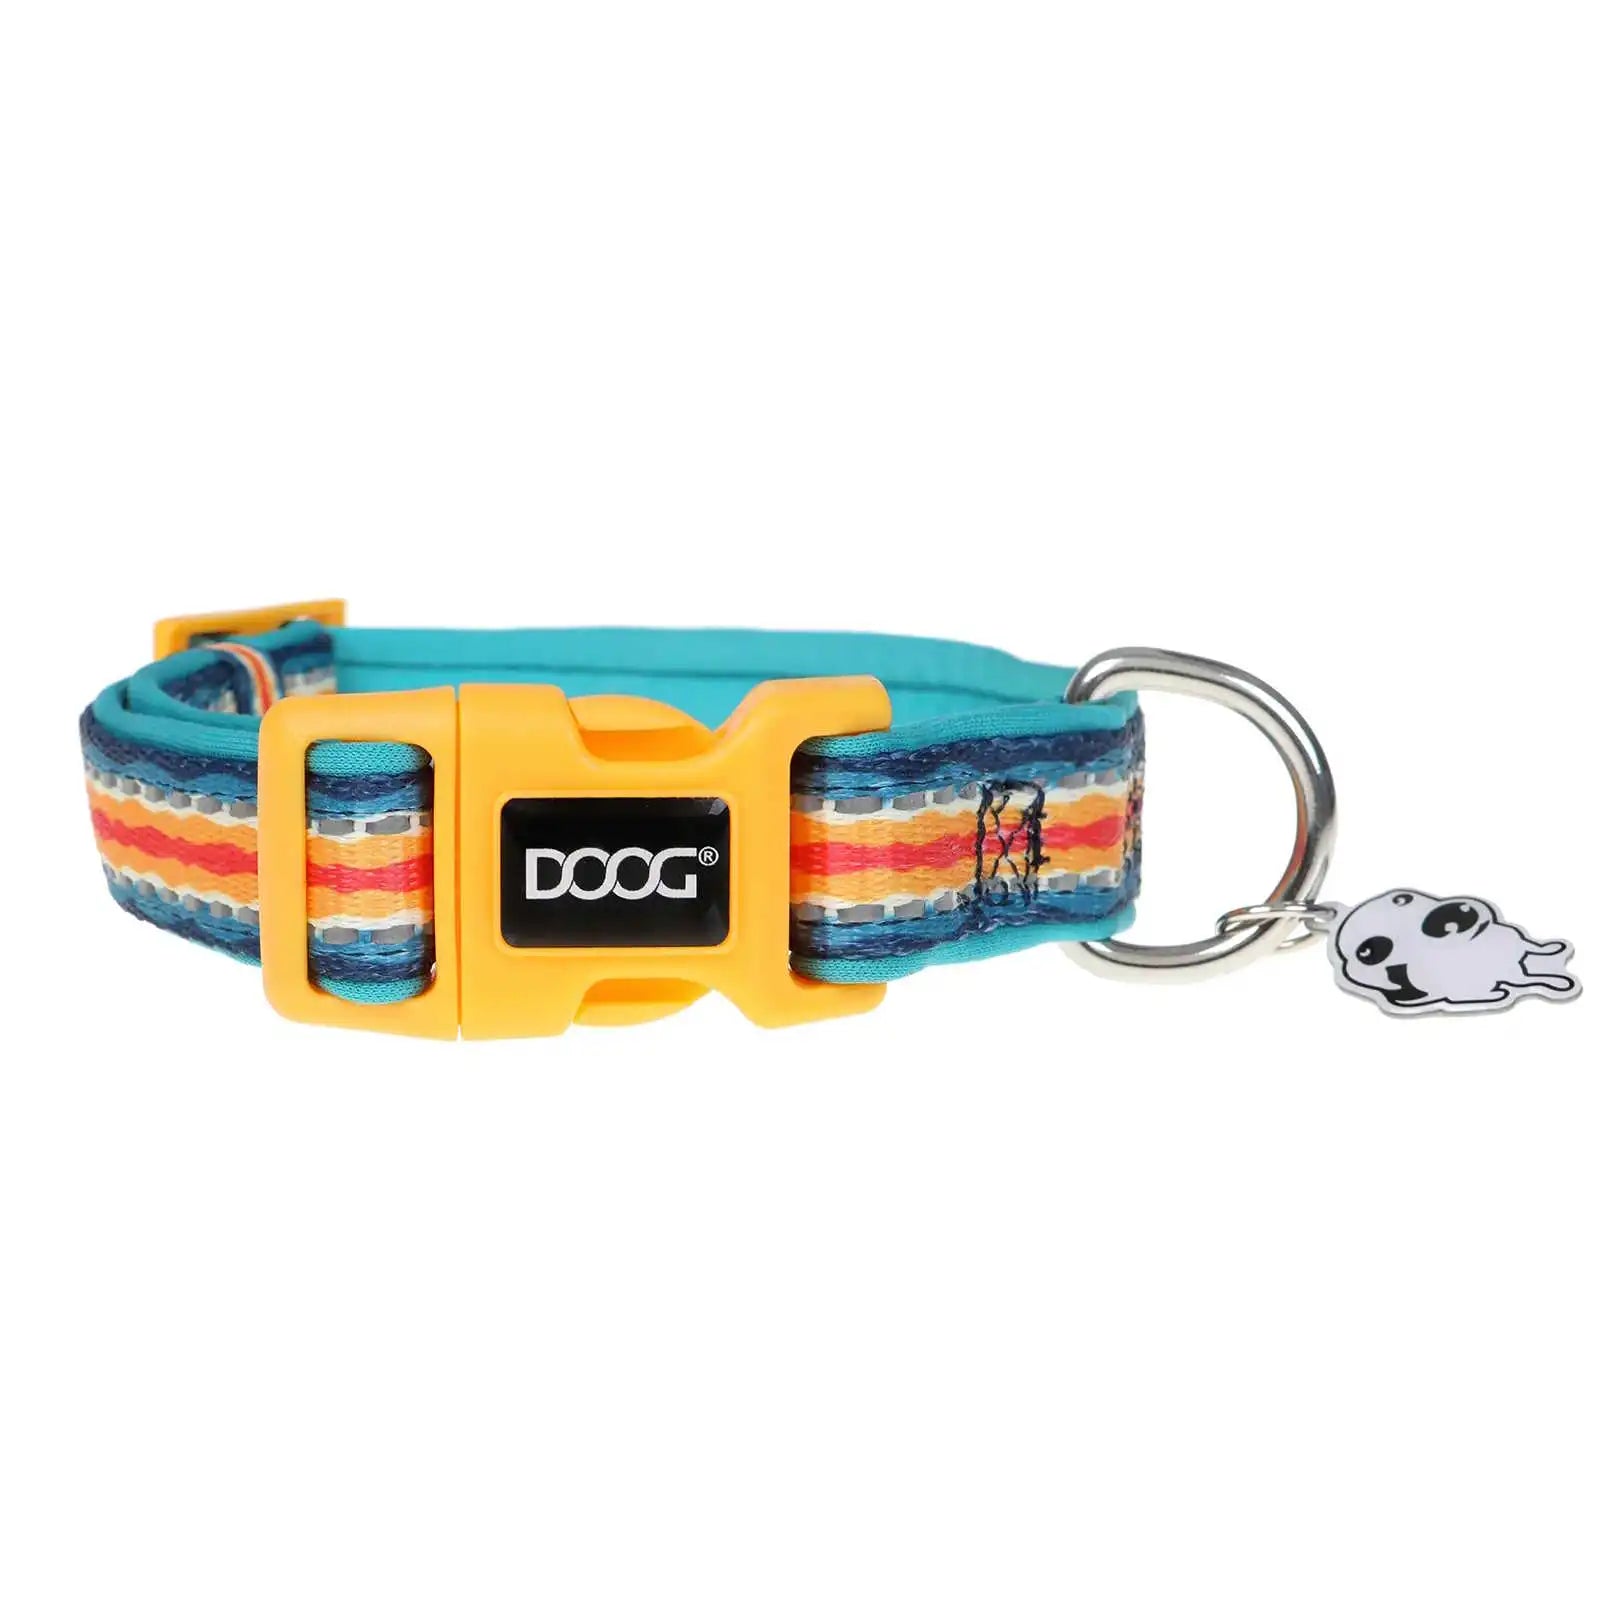 DOOG Neoprene Dog Collar Scout Small Yellow/Blue/Red